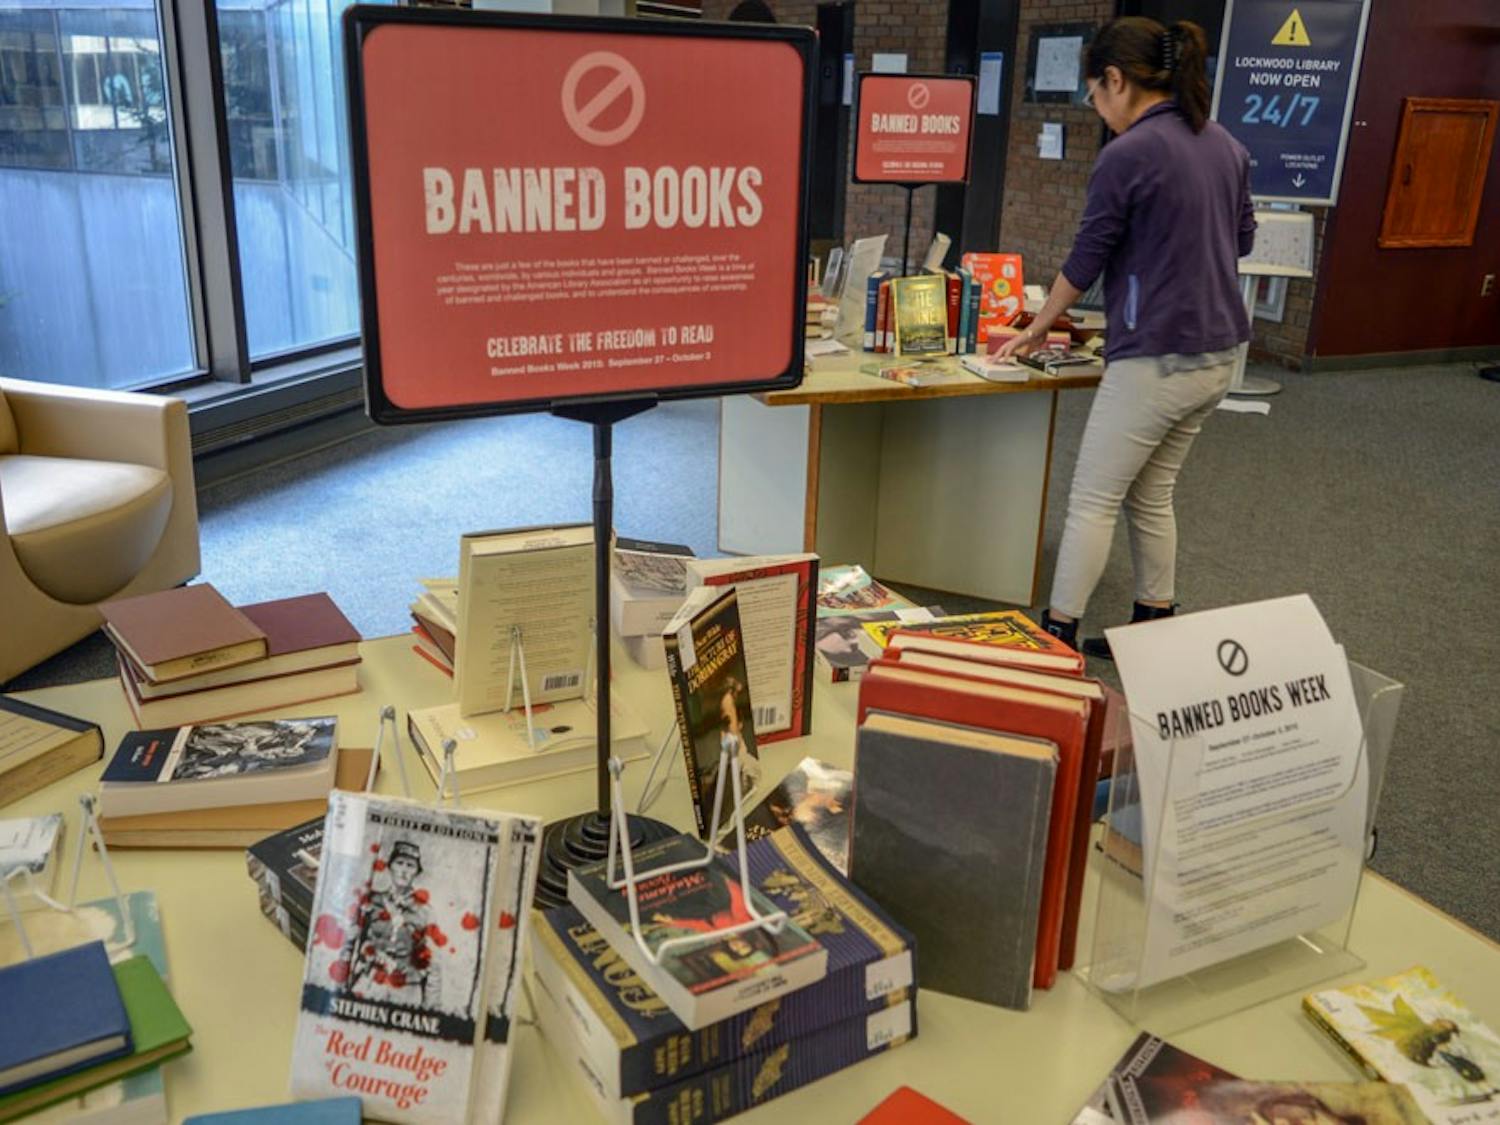 Lockwood Memorial Library has a display of commonly challenged books as a part of Banned Books Week. Banned Books Week is a nationwide effort to recognize controversial literature and the freedom to write without censorship.